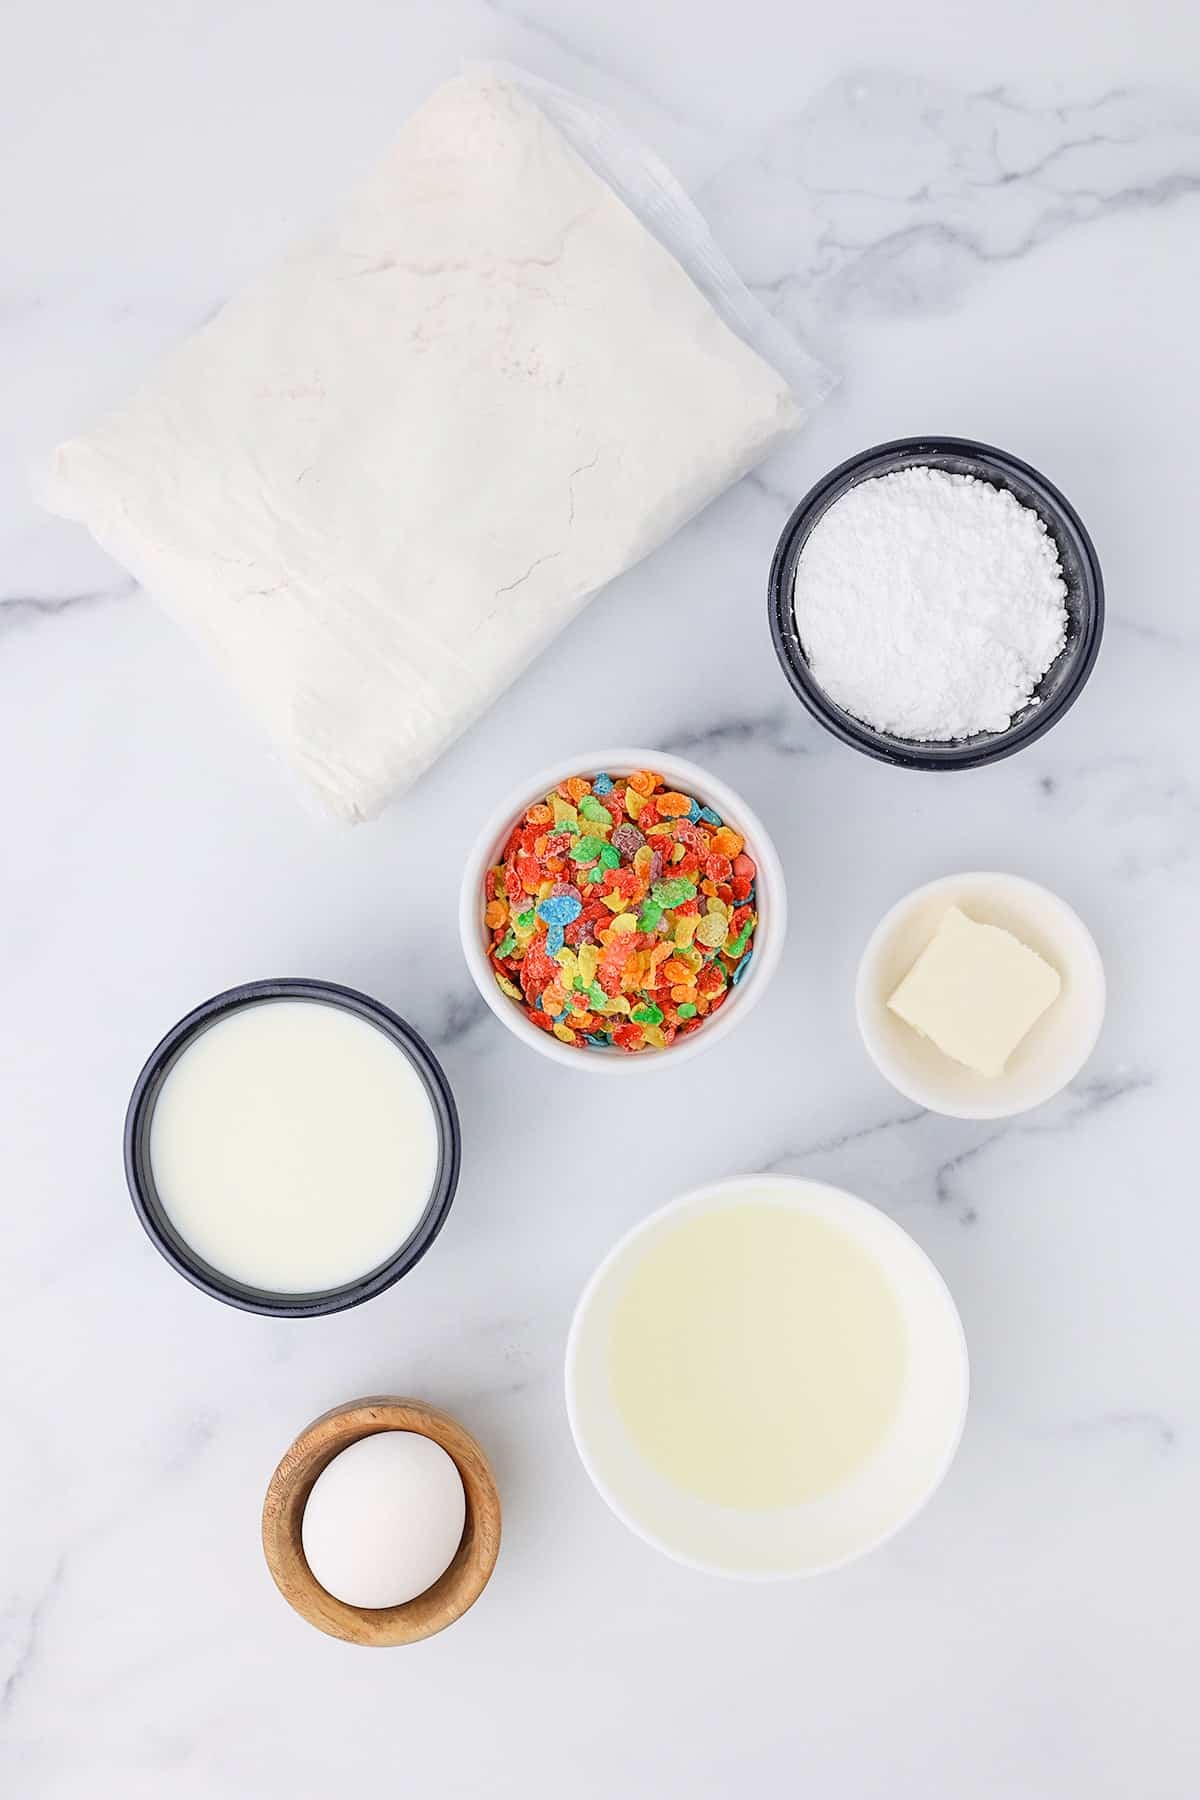 A package of white cake mix, some powdered sugar, a small bowl of fruity pebbles cereal, whole milk, one table spoon of butter, vegetable oil and a large white egg on a white counter top.